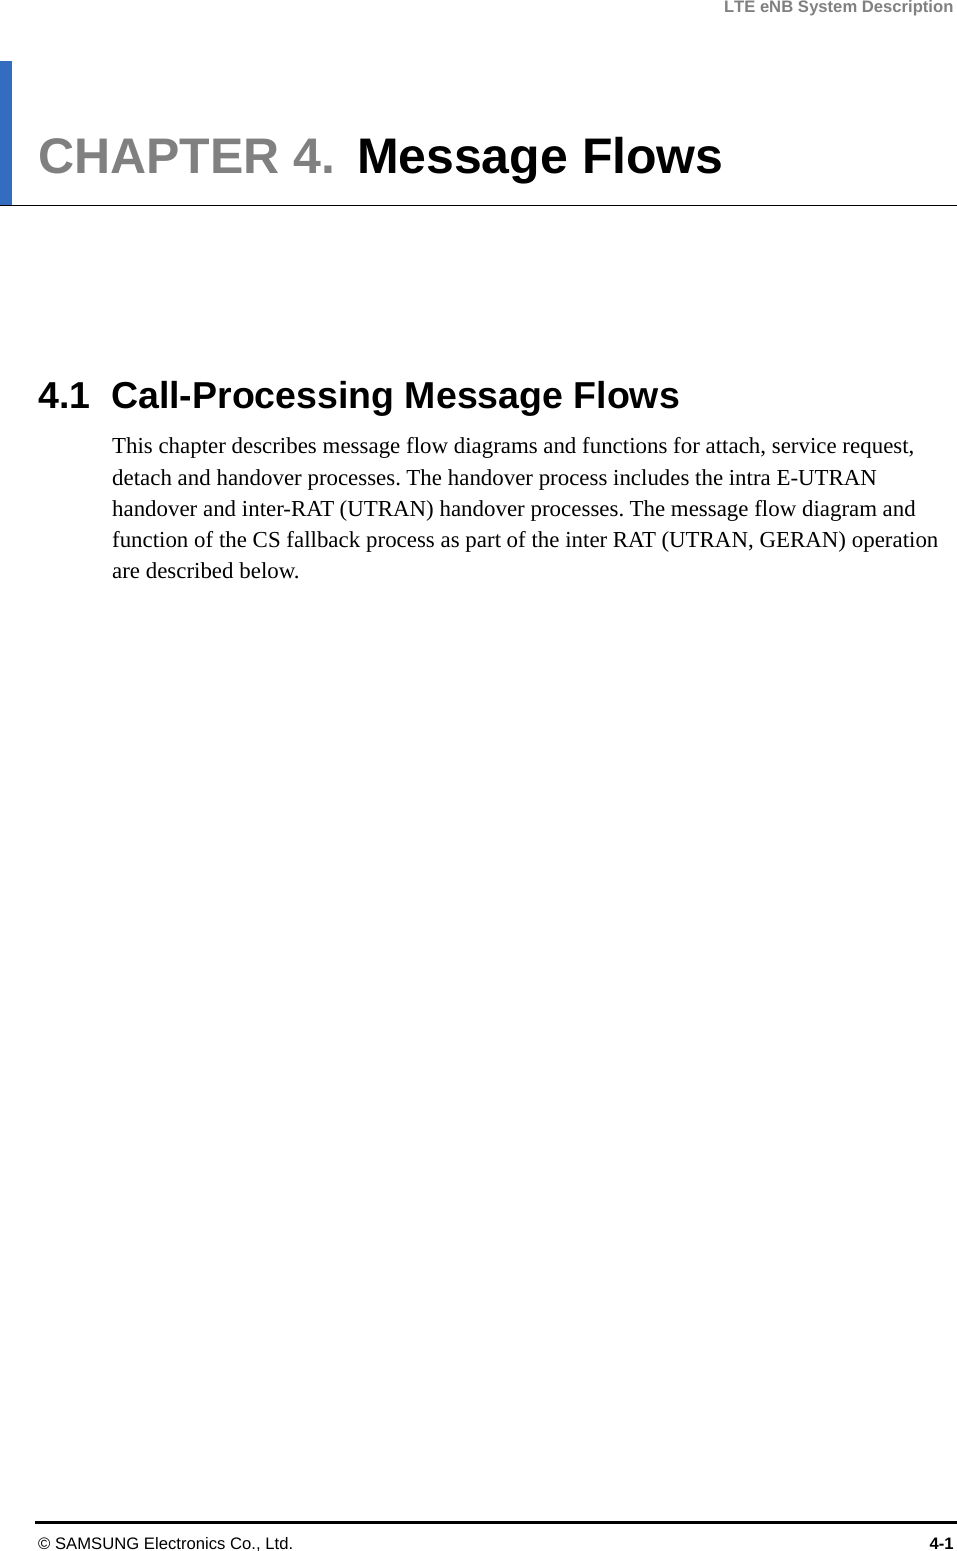 LTE eNB System Description CHAPTER 4.  Message Flows      4.1  Call-Processing Message Flows This chapter describes message flow diagrams and functions for attach, service request, detach and handover processes. The handover process includes the intra E-UTRAN handover and inter-RAT (UTRAN) handover processes. The message flow diagram and function of the CS fallback process as part of the inter RAT (UTRAN, GERAN) operation are described below.  © SAMSUNG Electronics Co., Ltd.  4-1 